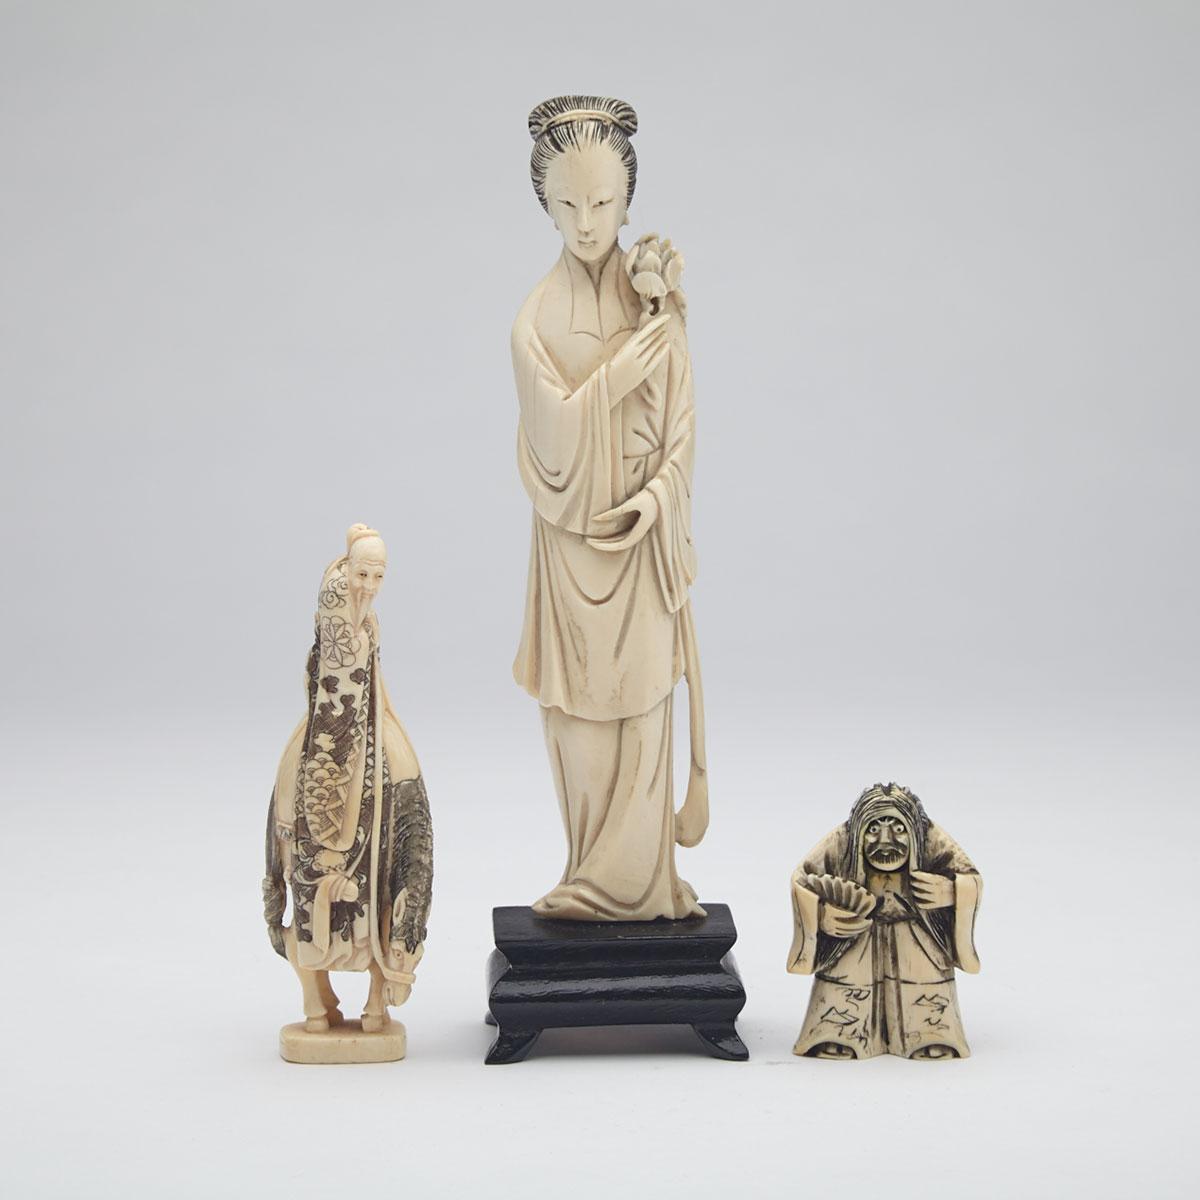 Three Ivory Carvings, China and Japan, Early 20th Century